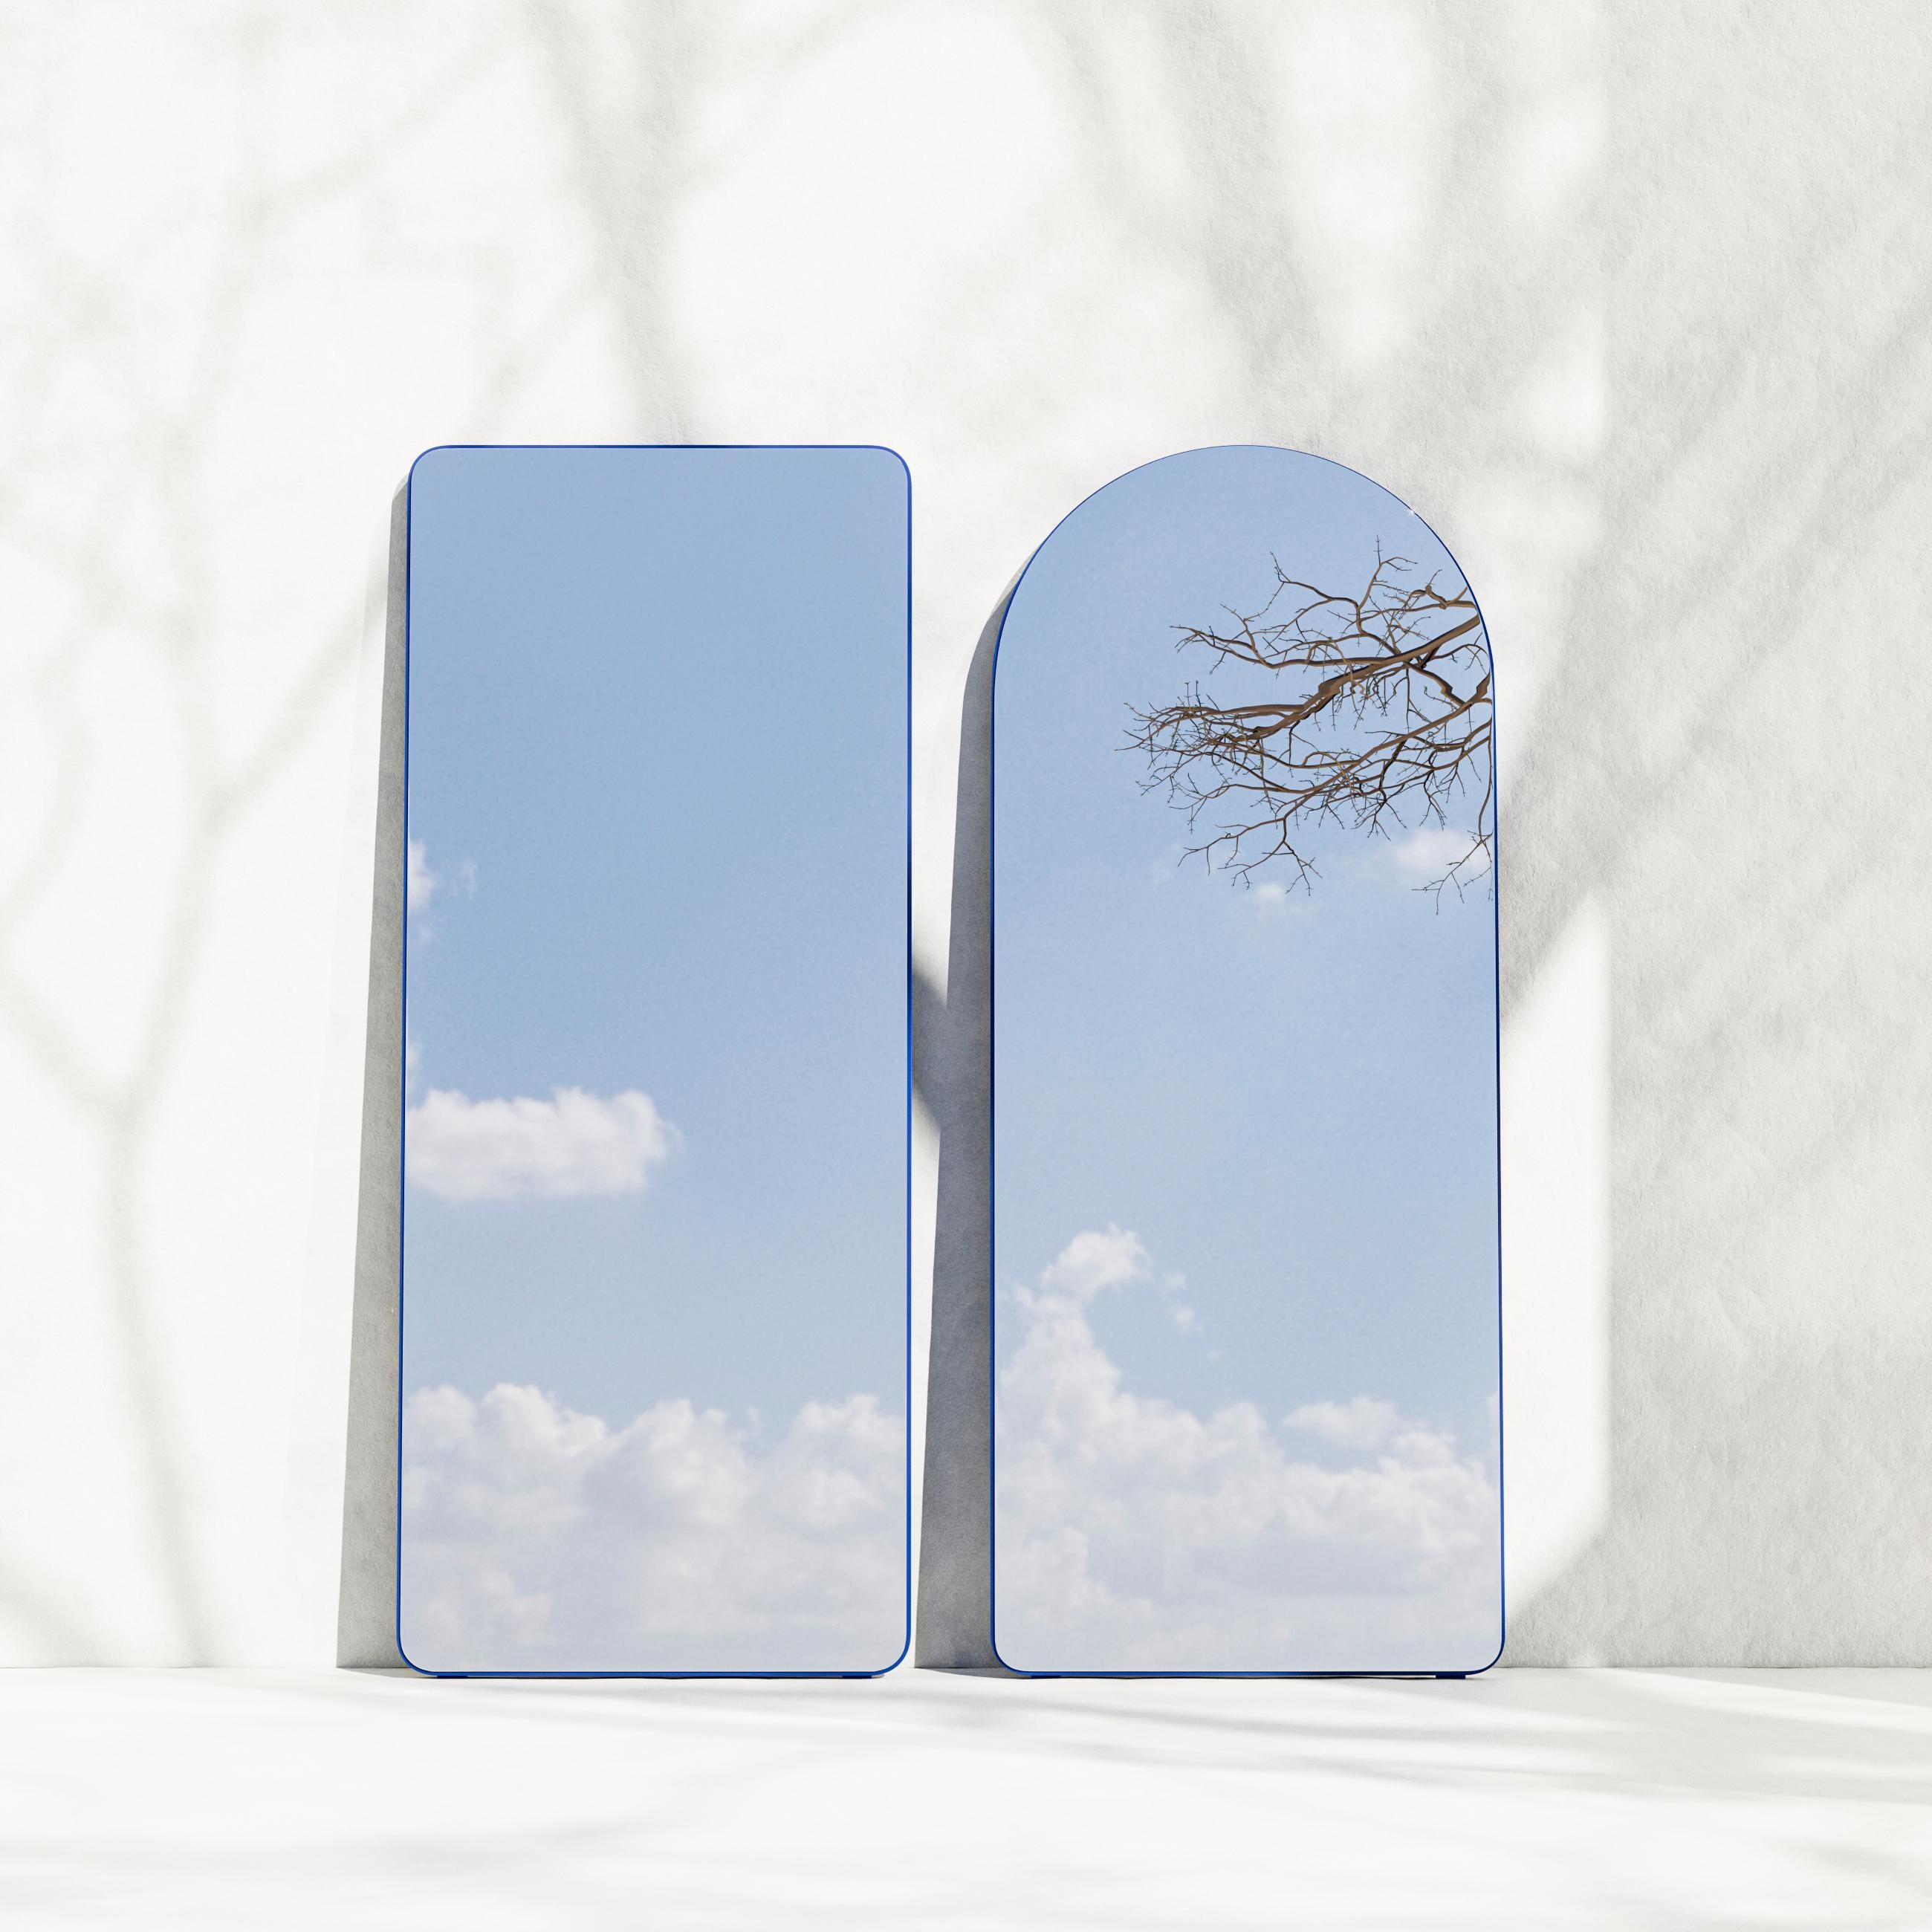 Contemporary mirror 'Loveself 05' by Oitoproducts
RAL3005

Dimensions:
W 70 cm x H 180 cm x D 4 cm
W 27.5 in x H 71 in x D 1.3 in

Materials: Painted ecological water paint MDF, silver glass mirror, special rubber feet.

About
LOVESELF is a